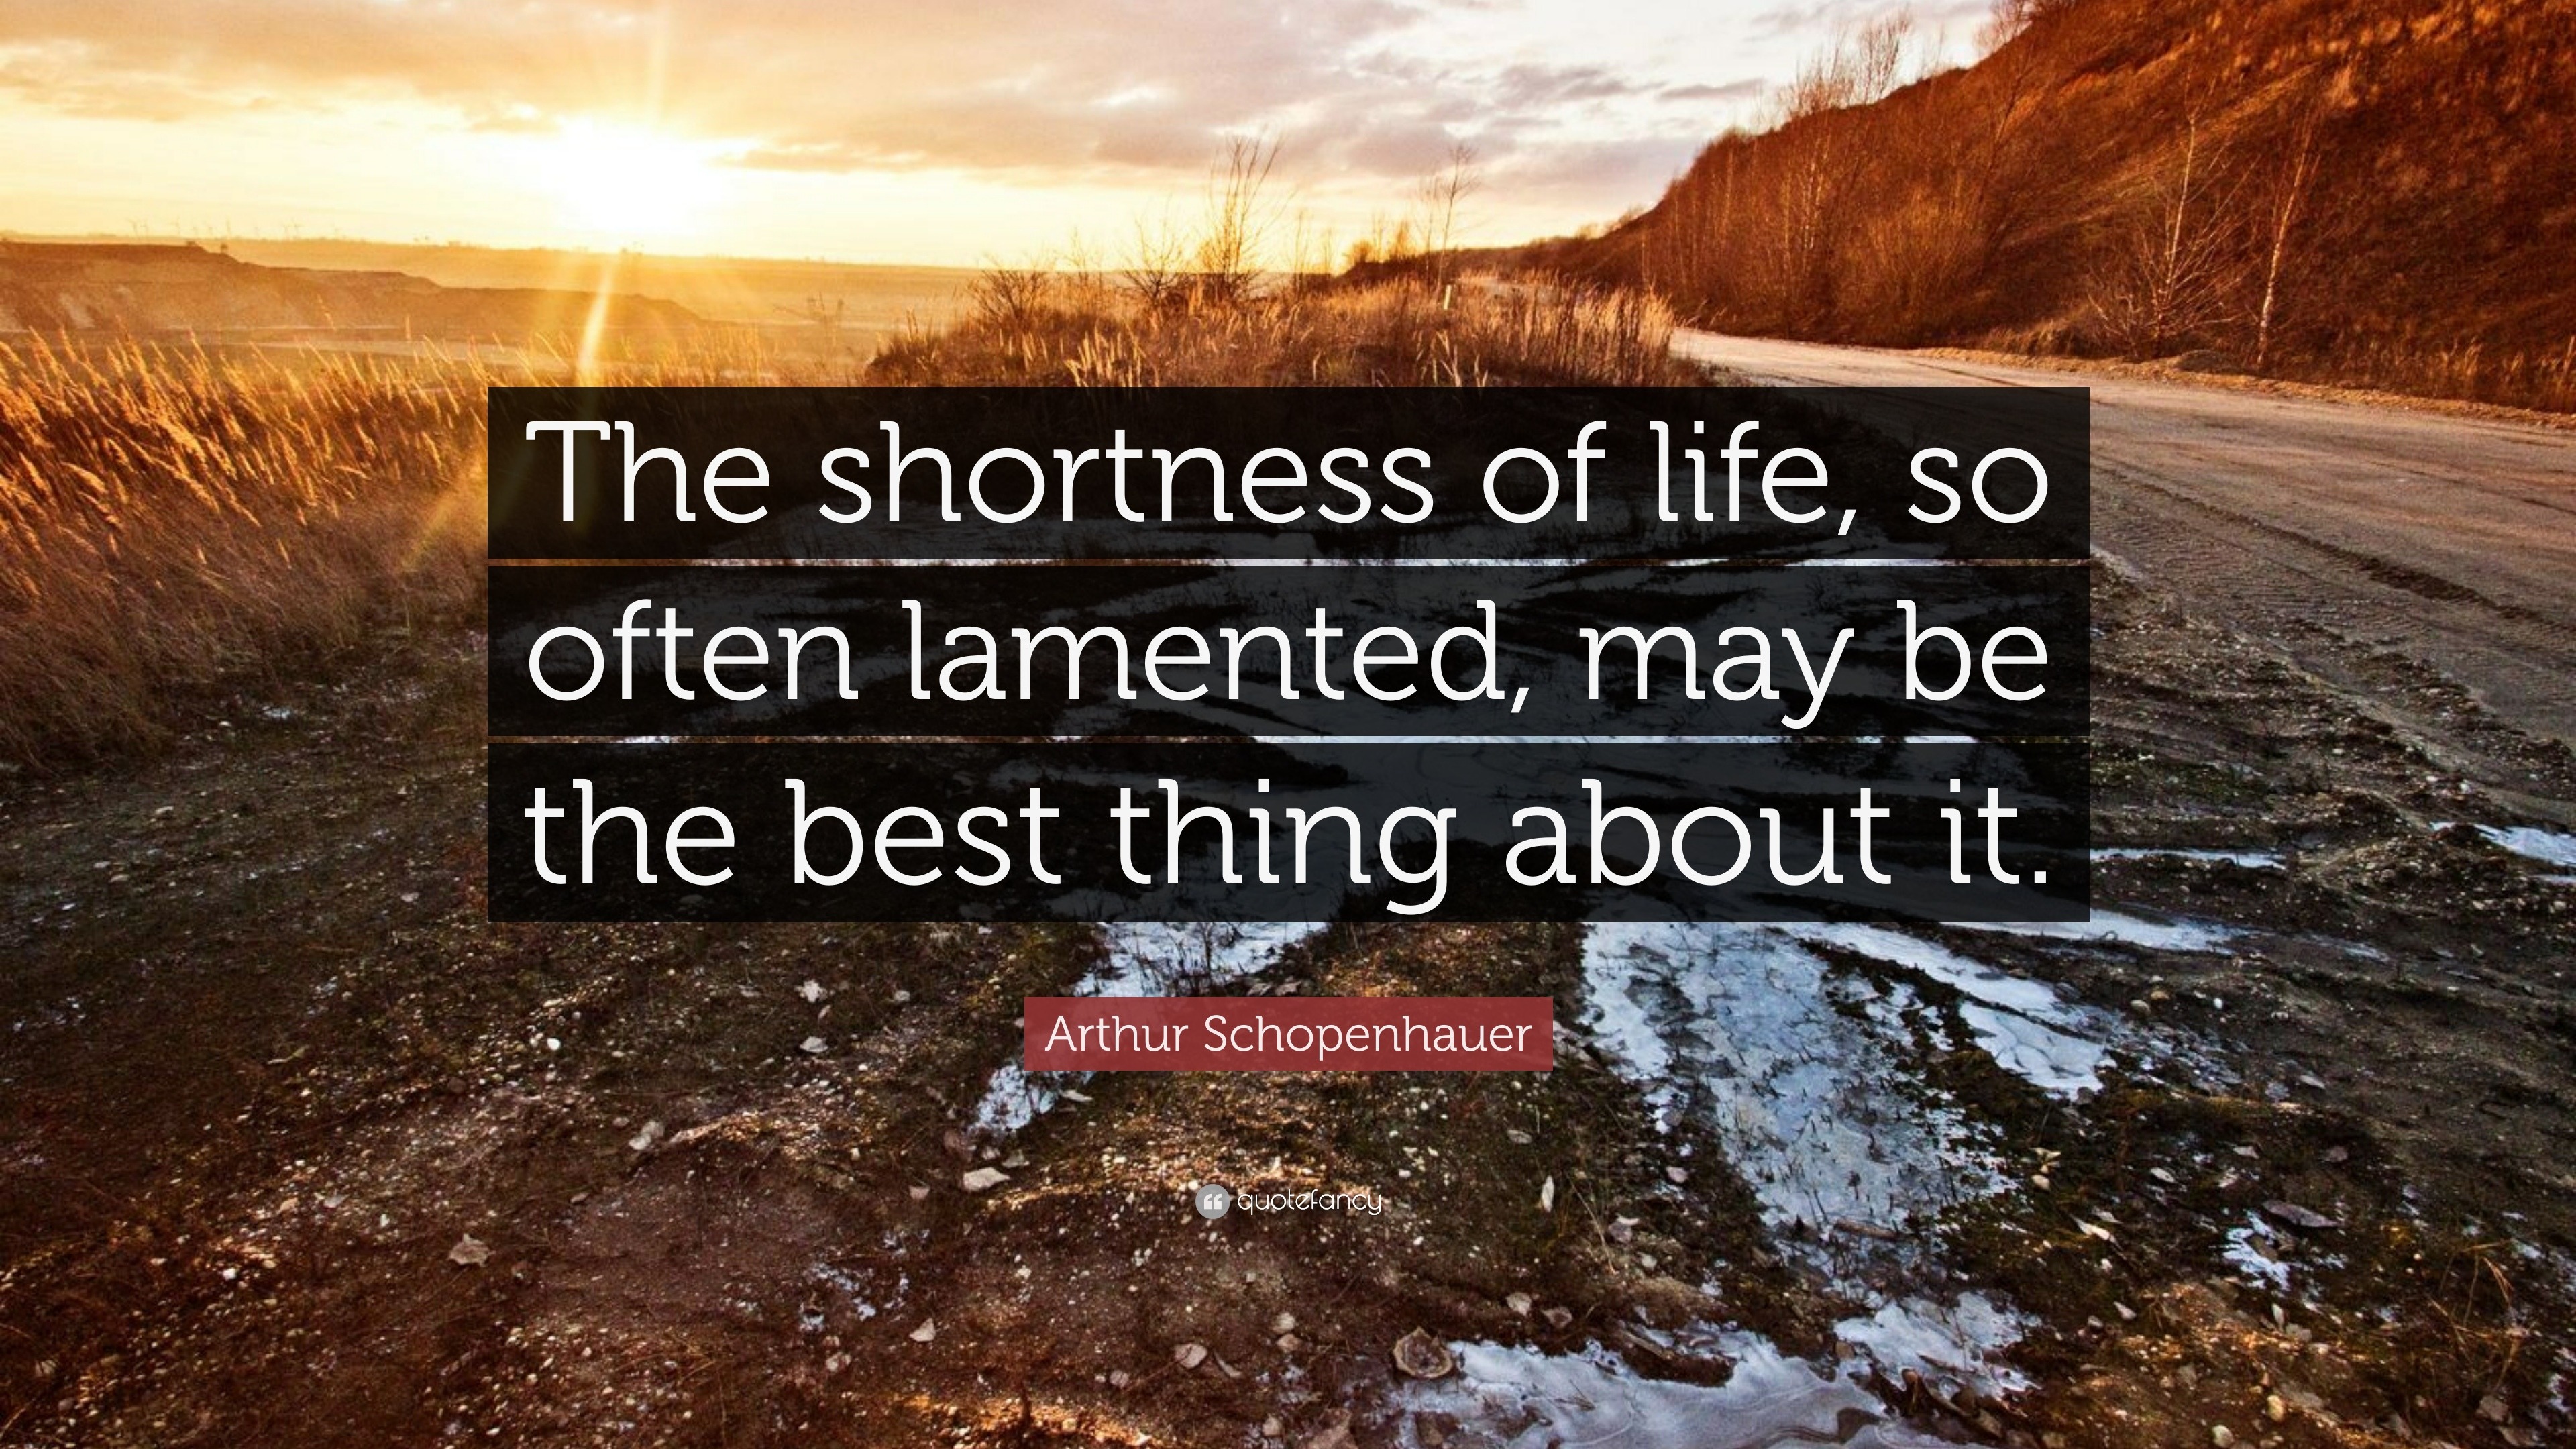 Arthur Schopenhauer Quote “The shortness of life so often lamented may be